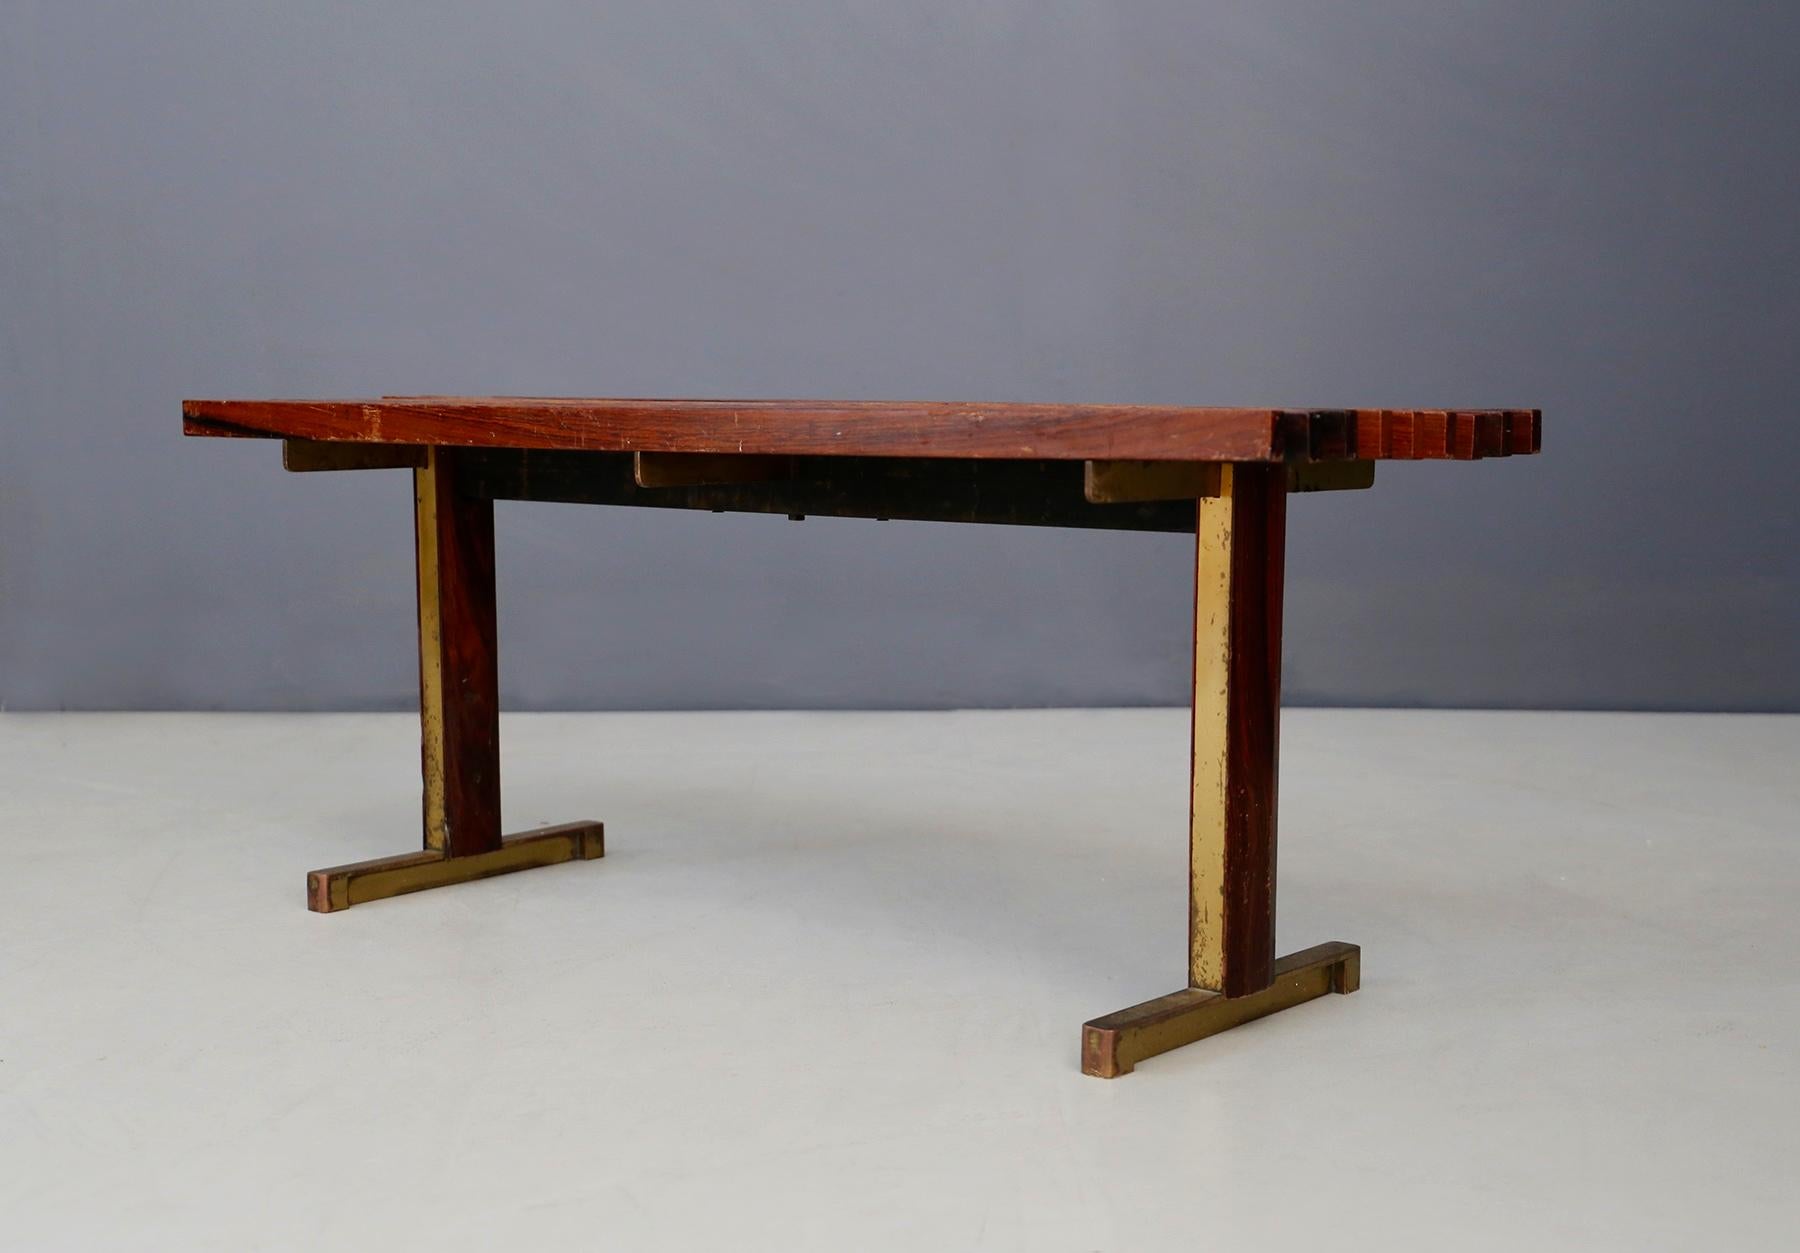 Rare bench by Carlo Graffi made in 1950. The structure is in staves in walnut wood. Its side feet are made of brass and wood pedestal. The bench is ideal for furnishing the entrance of a house or a living room. The bench is in good vintage condition